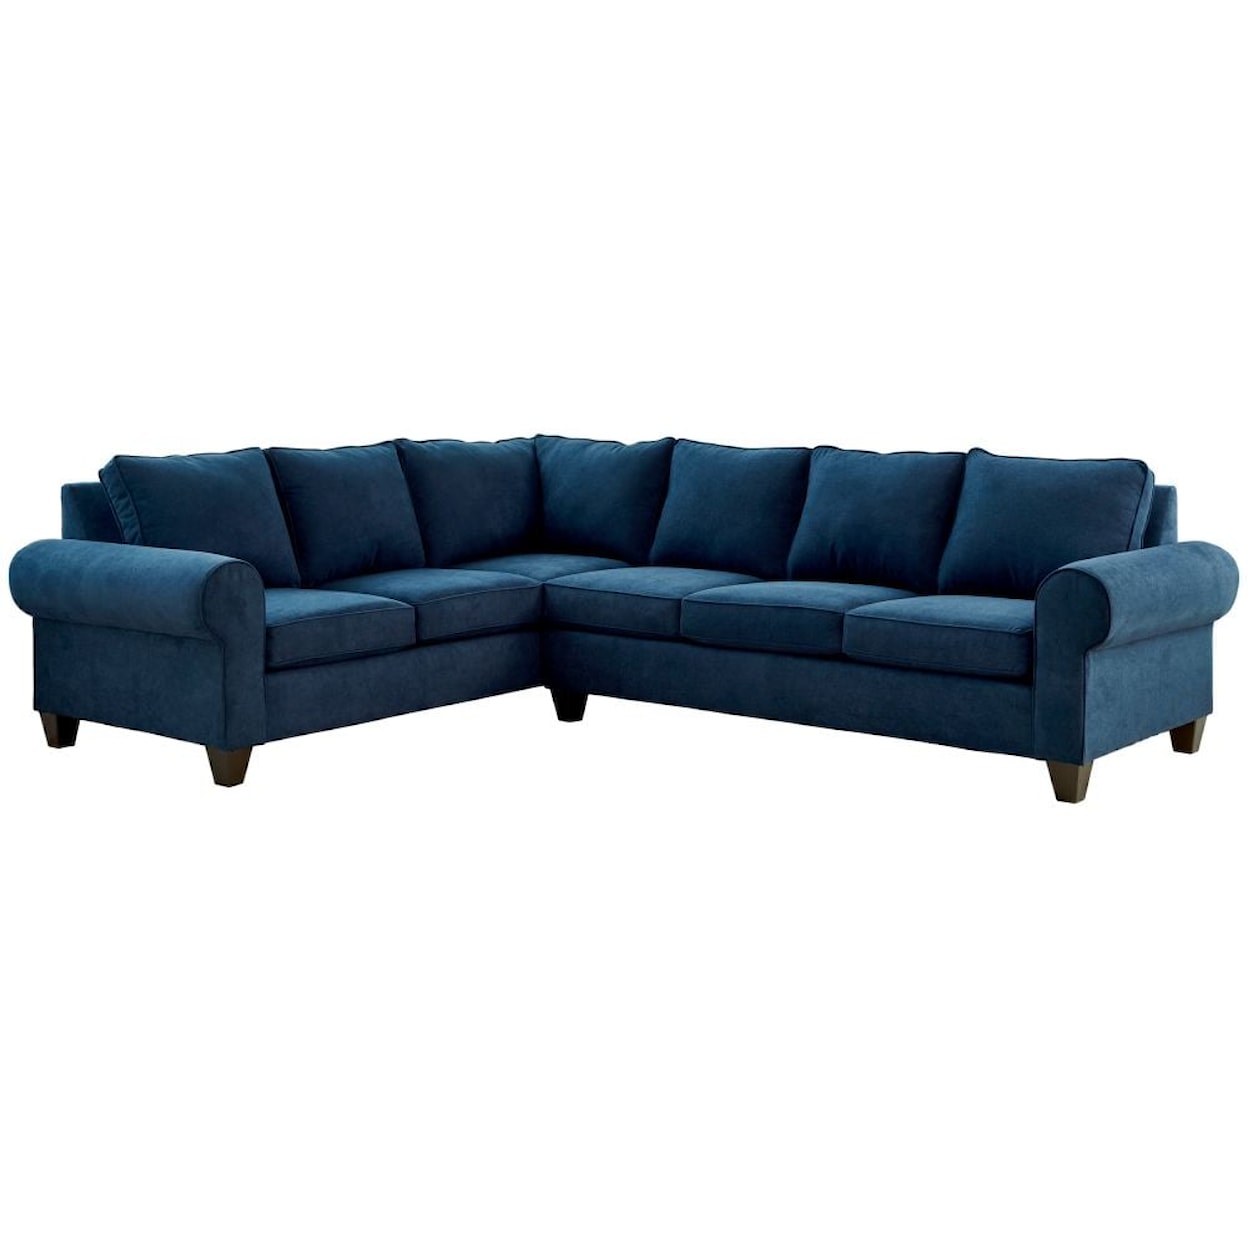 Elements International 705 LHF Sectional Sofa with Rolled Arms